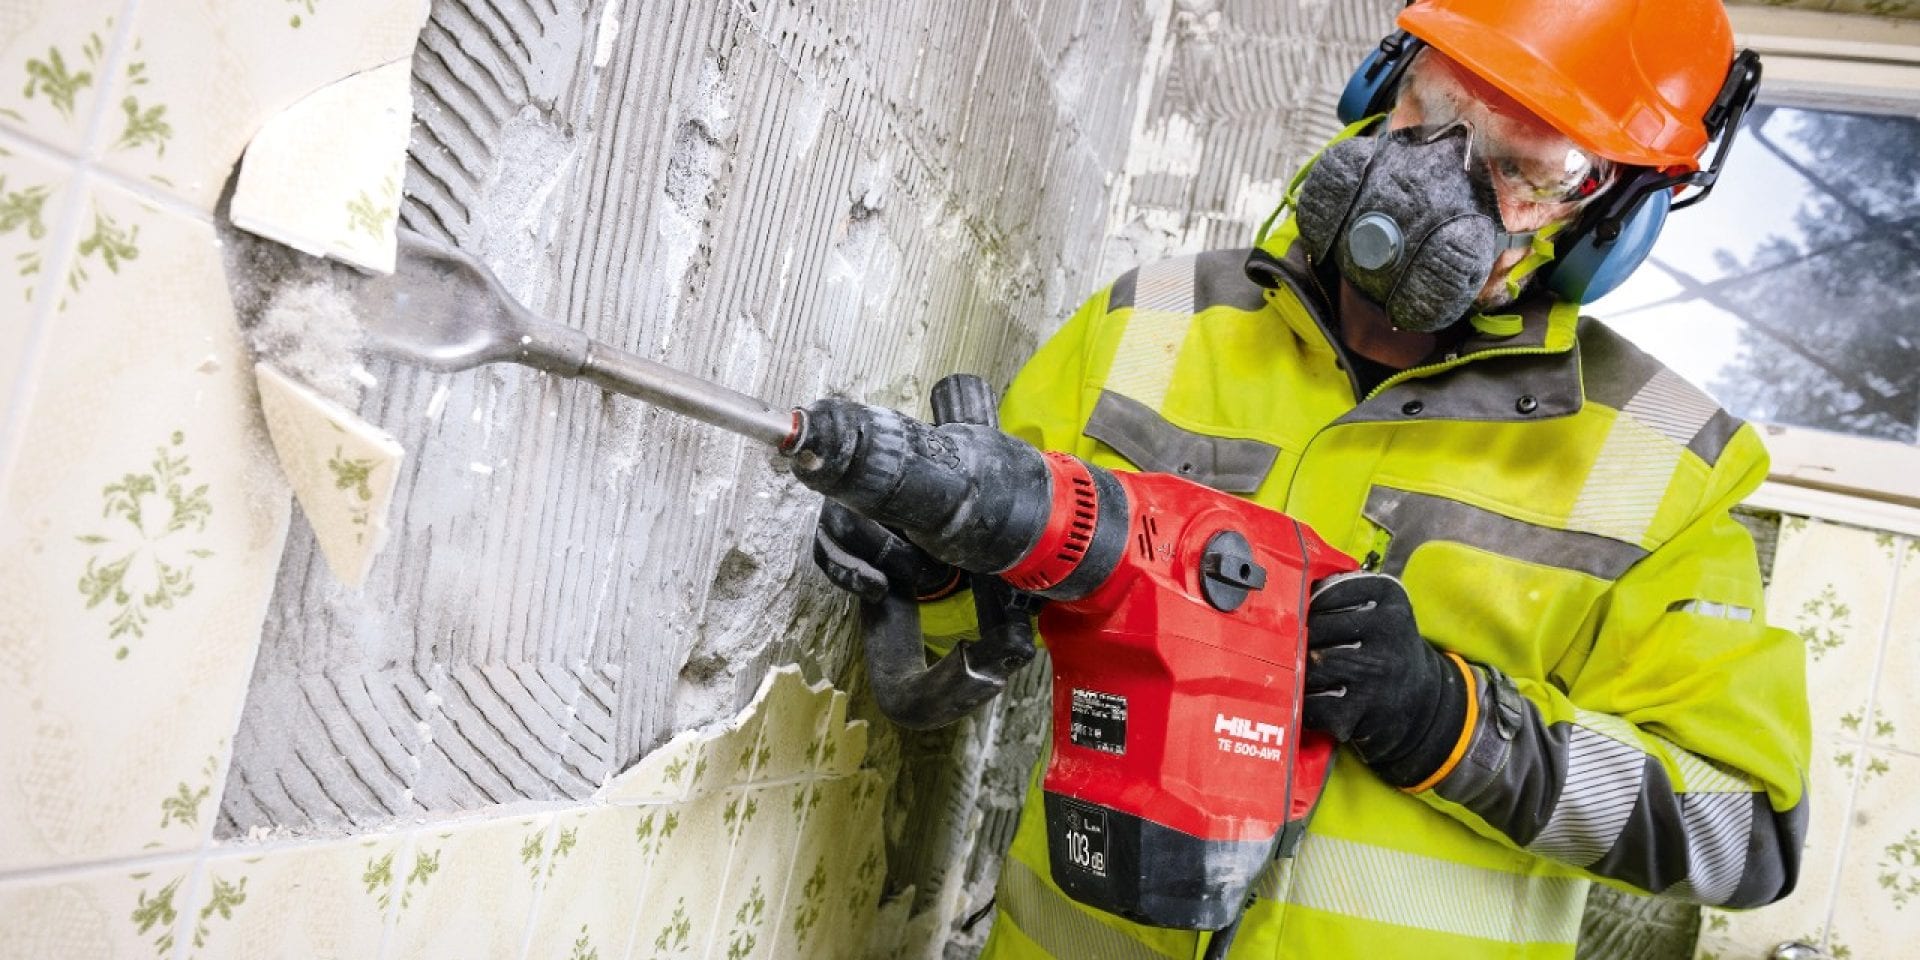 Removing tiles with Hilti TE 500-AVR